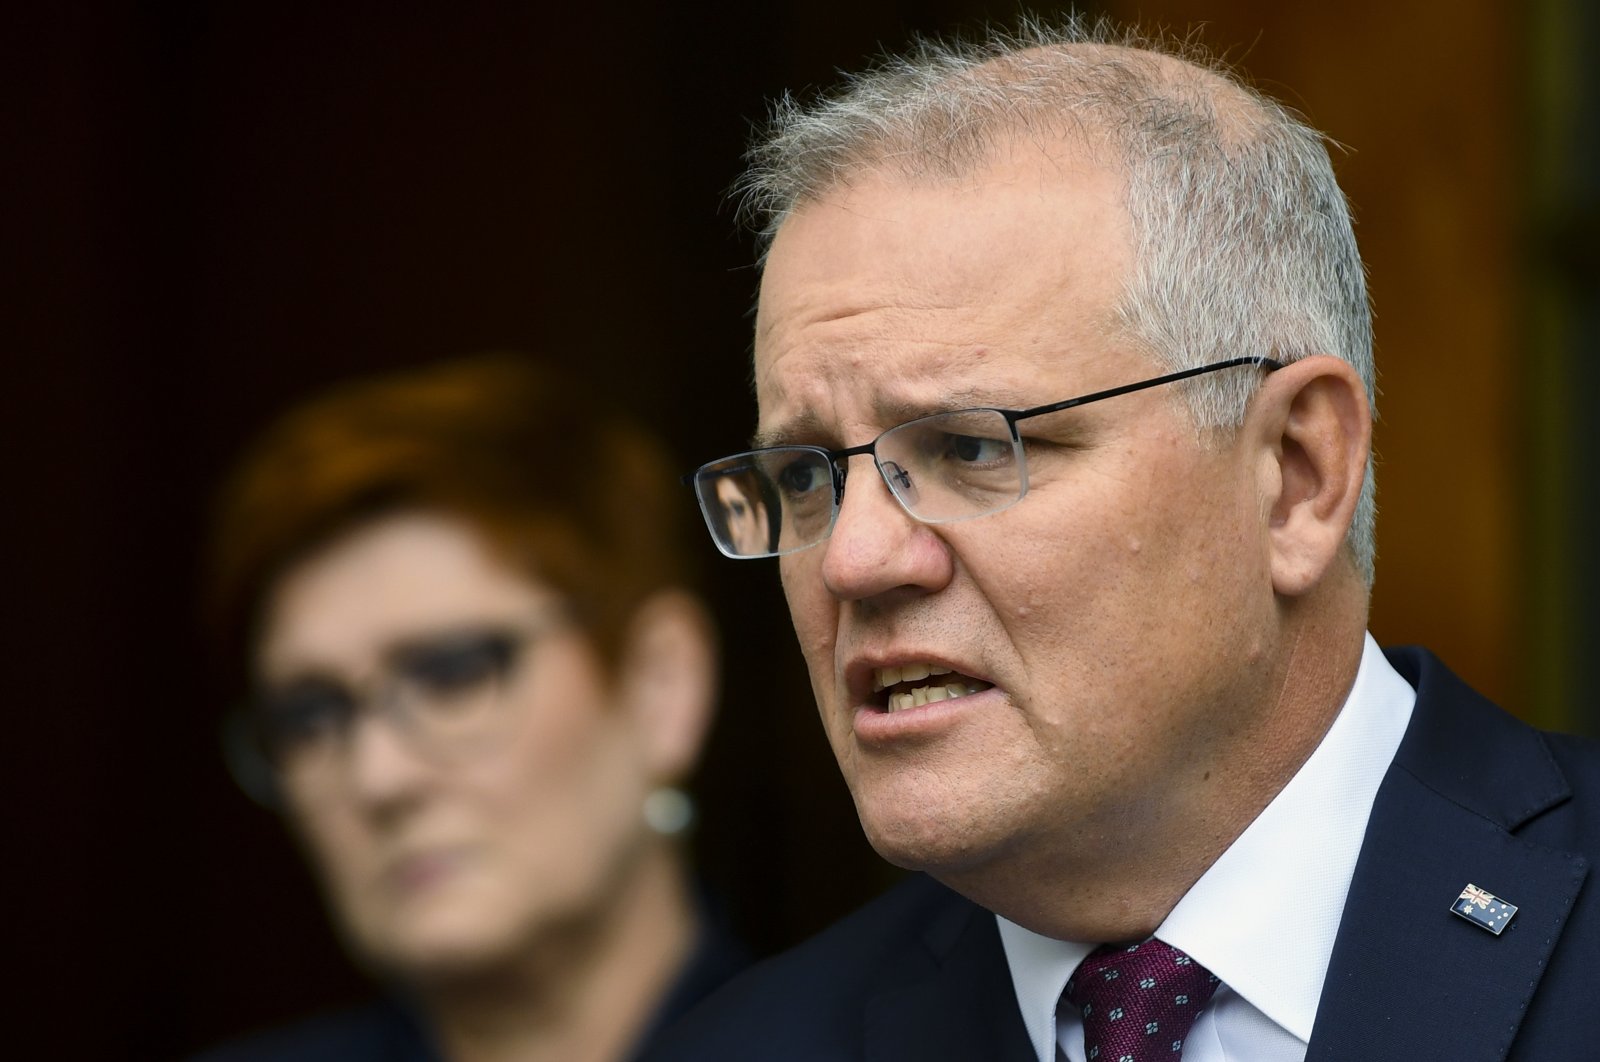 Australian Prime Minister Scott Morrison speaks to the media during a press conference at Parliament House in Canberra, Australia, March 17, 2021. (AP Photo)